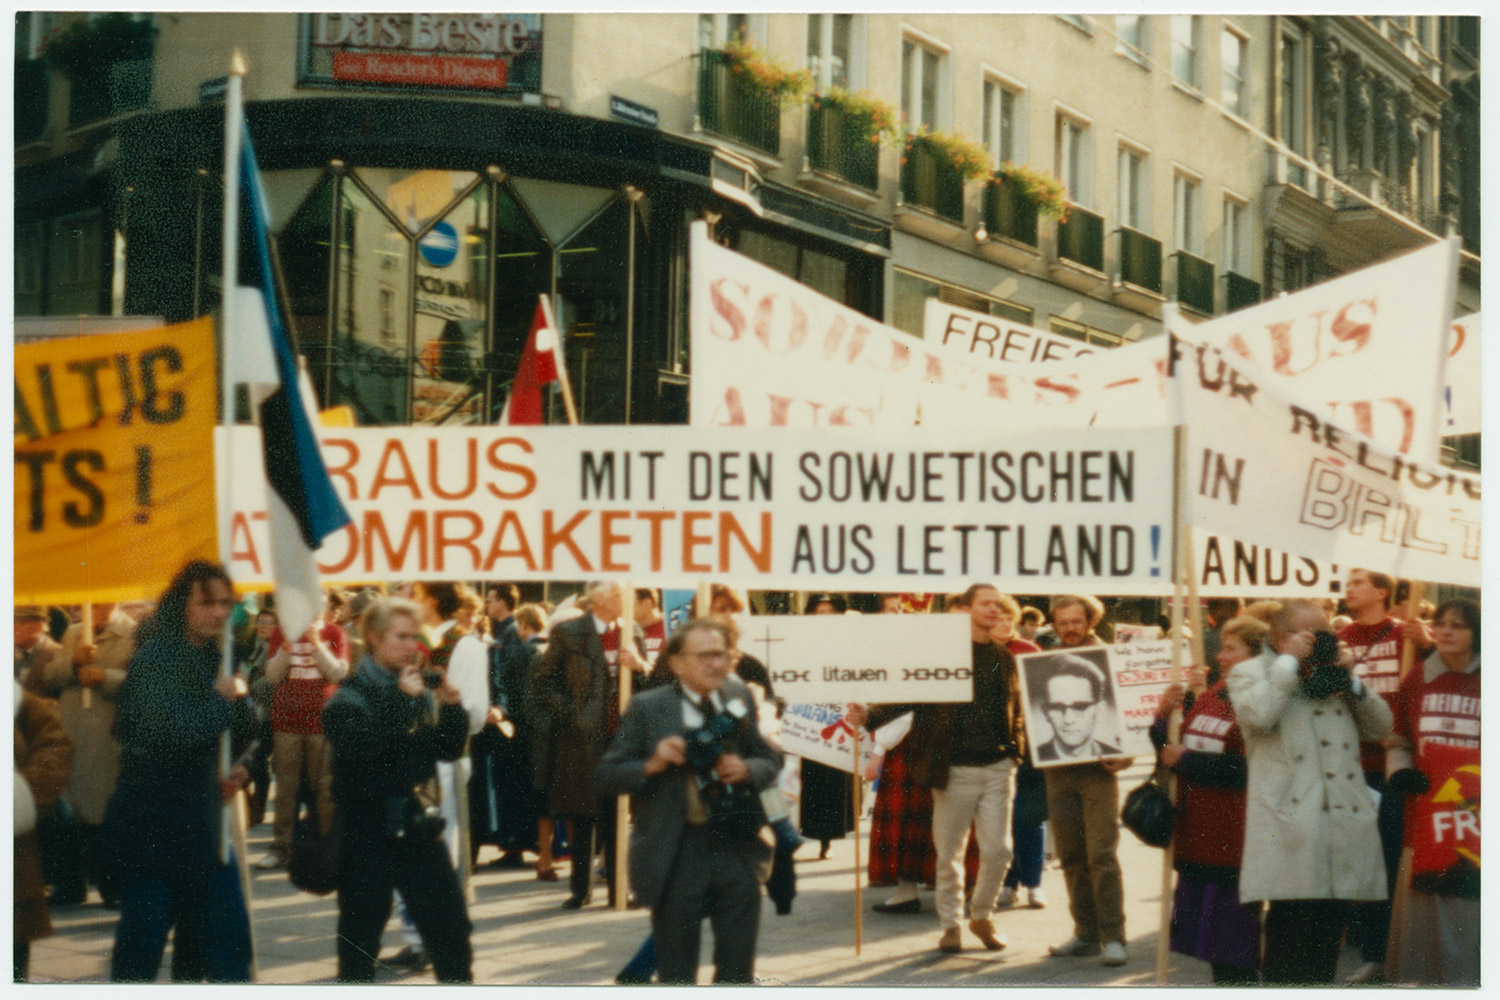 1986 – Vienna, Austria. Protest demonstration against the occupation of the Baltic States during the OSCE Conference in Vienna. Posters demanding the withdrawal of the Soviet army from the Baltic countries. LVCA.